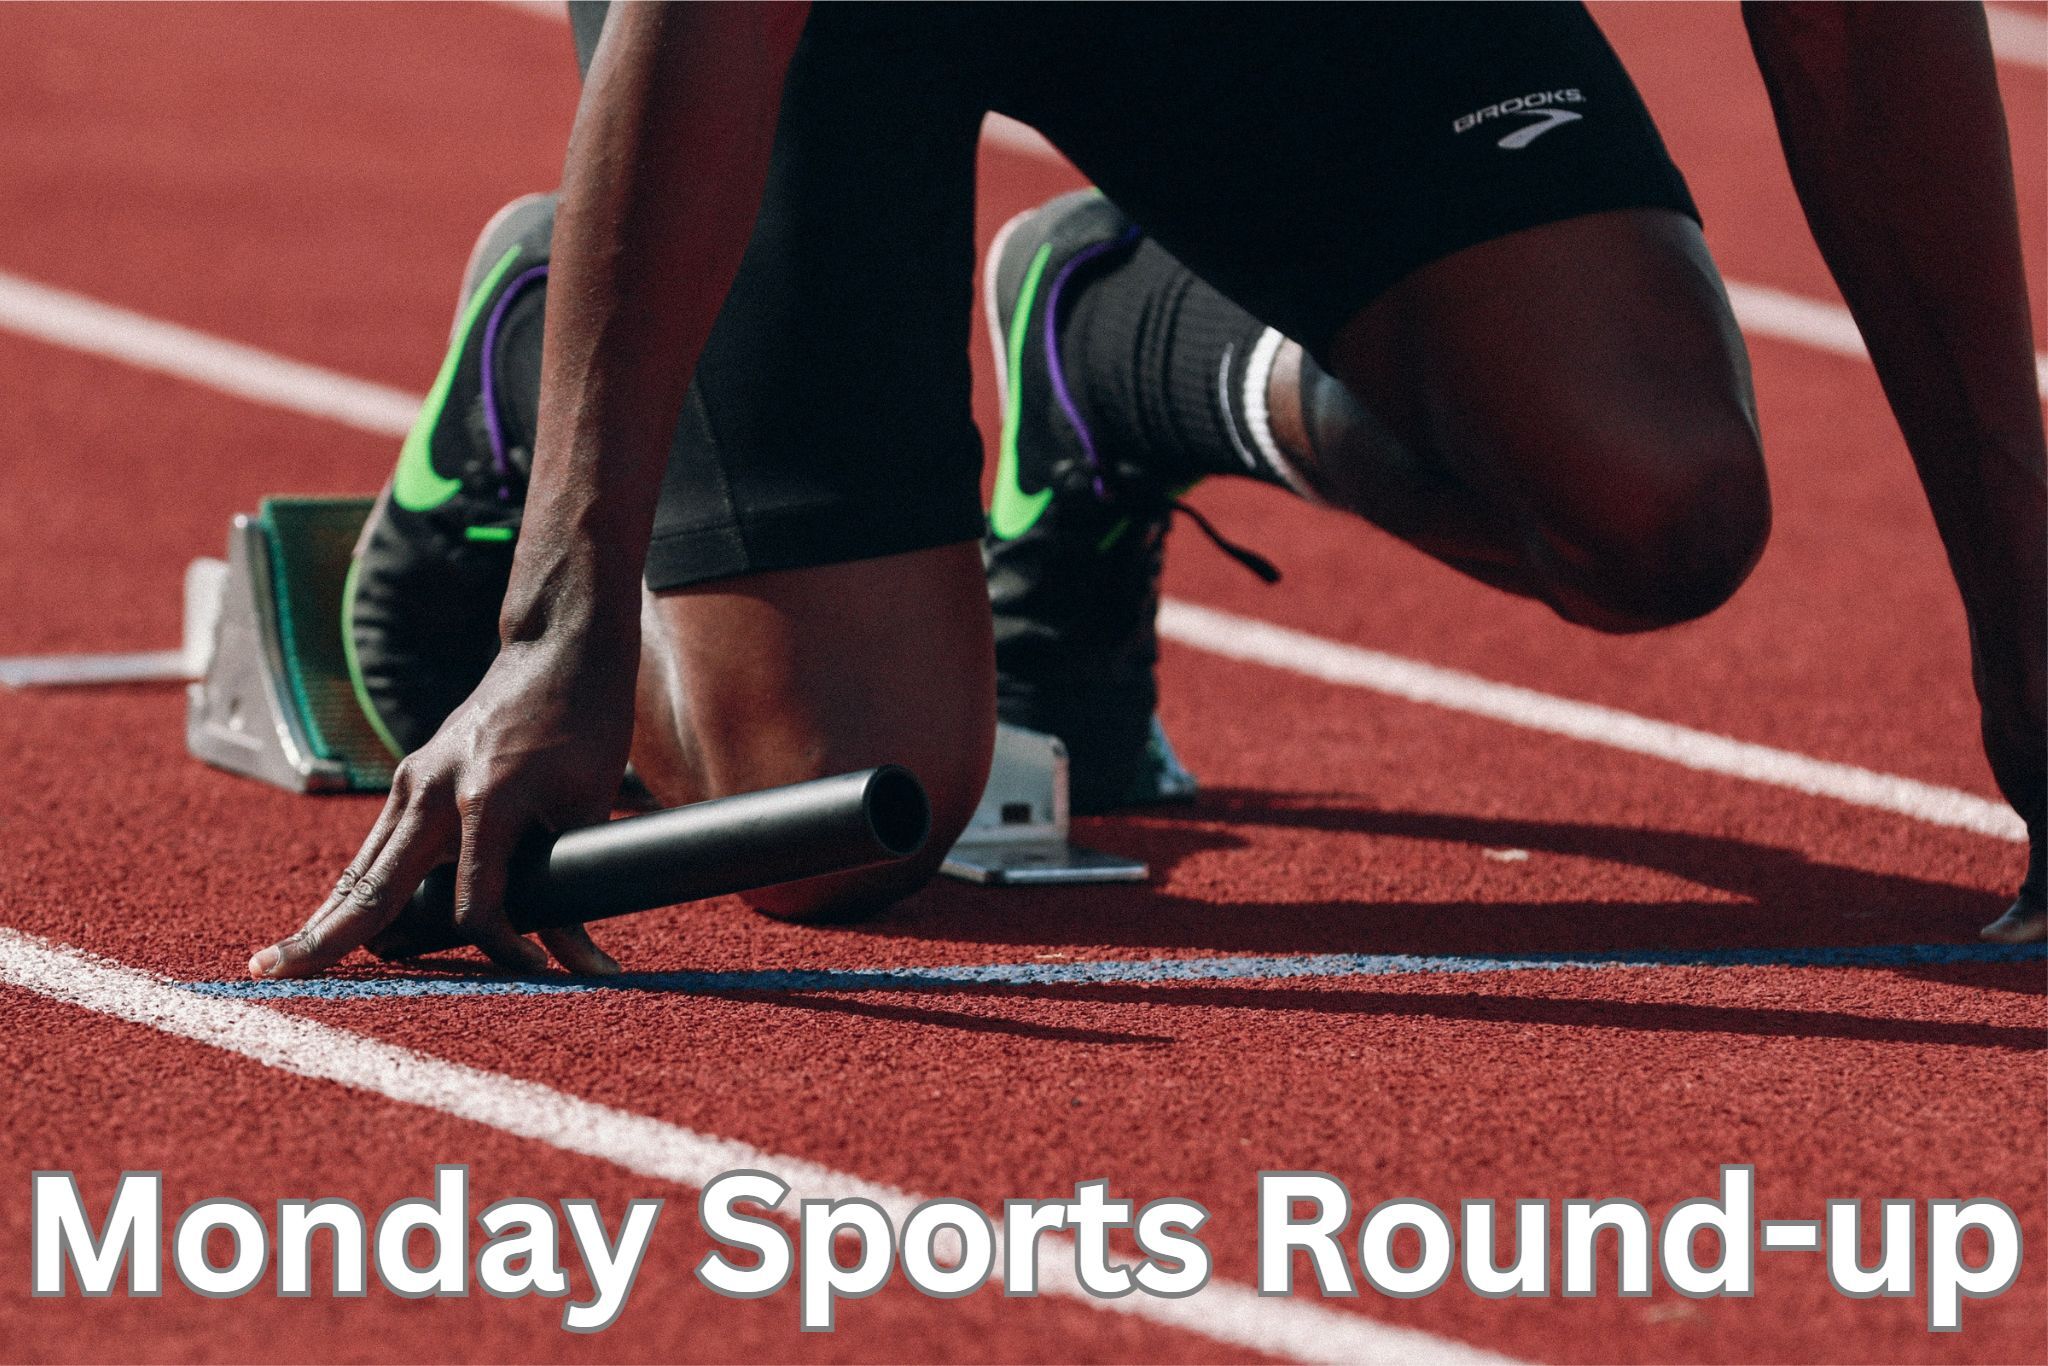 The Monday sports round up